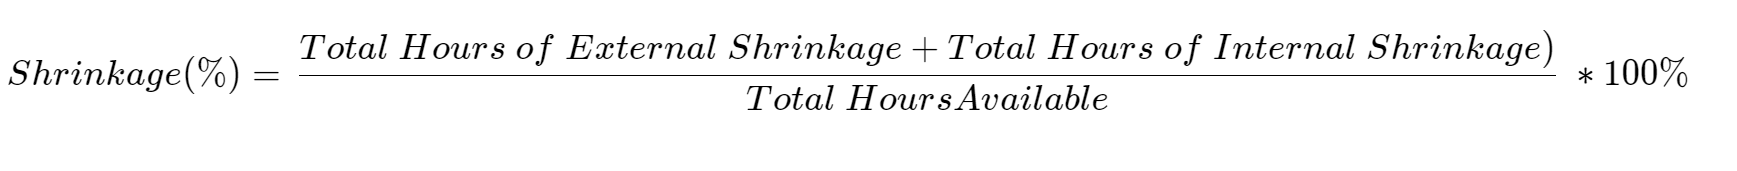 call center shrinkage in terms of number of hours